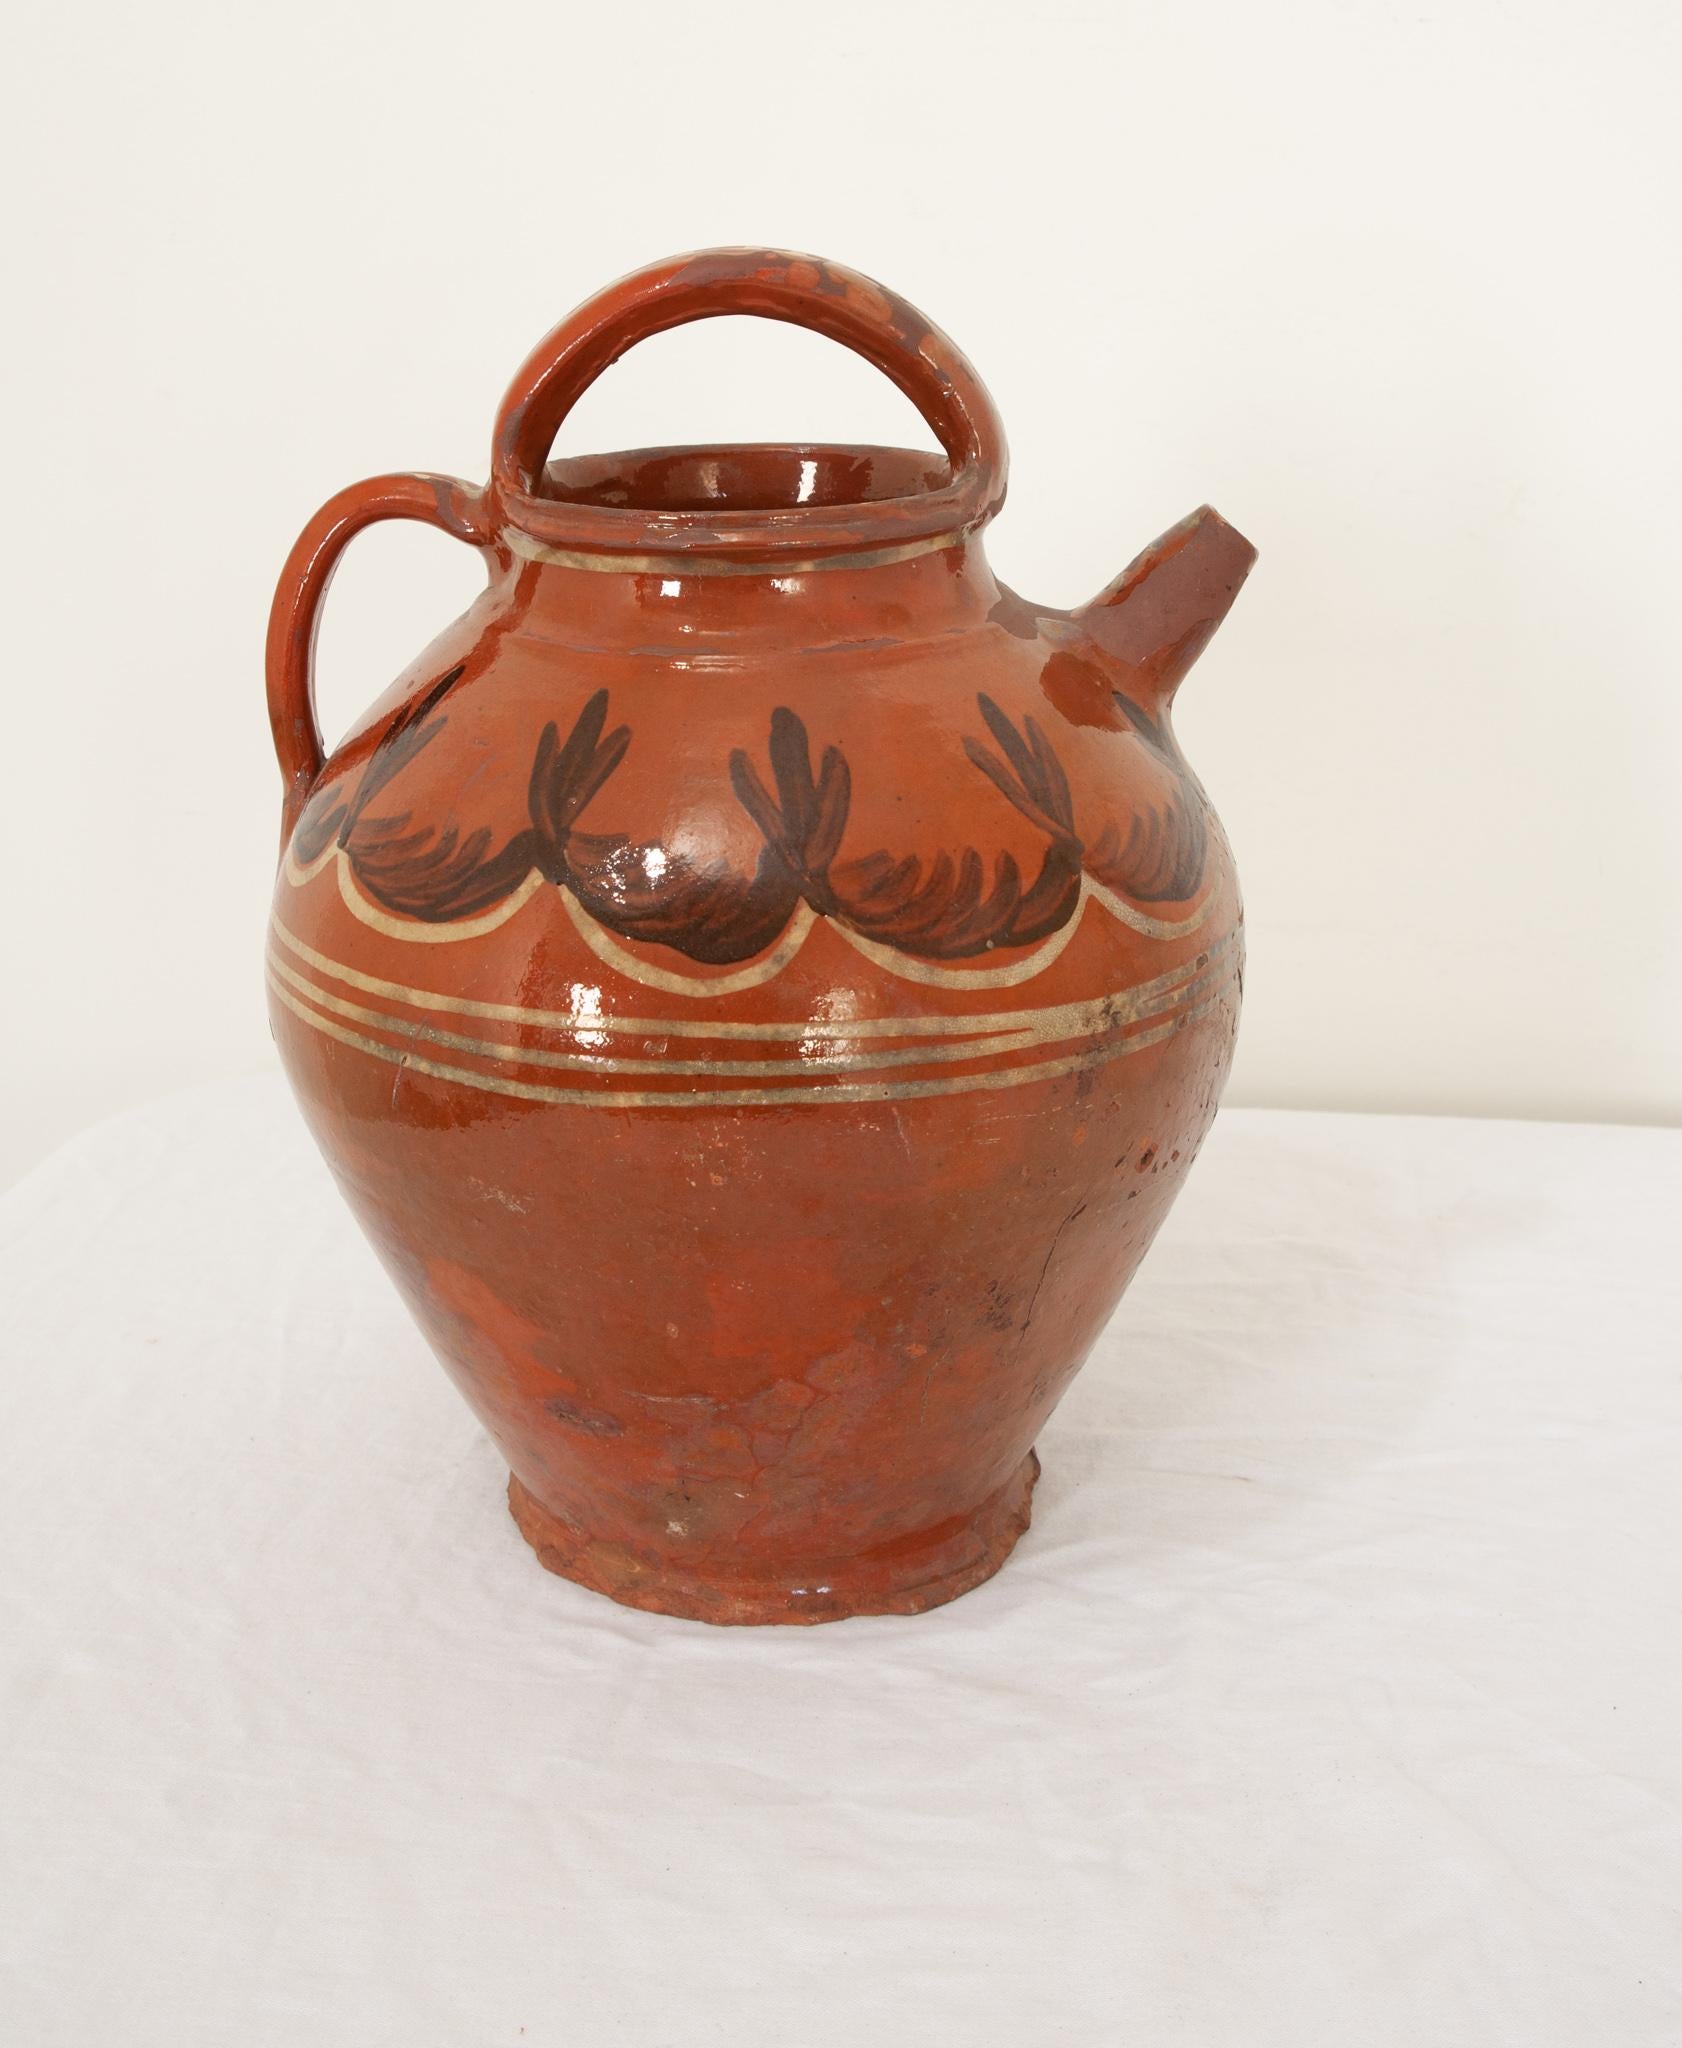 A French terracotta olive oil jar from the 19th century, with wonderful glazes of vibrant orange and detailed cream and black decorations of fluid lines and surrounding foliate designs. Hand-crafted in France circa 1850 this terracotta oil jar has a